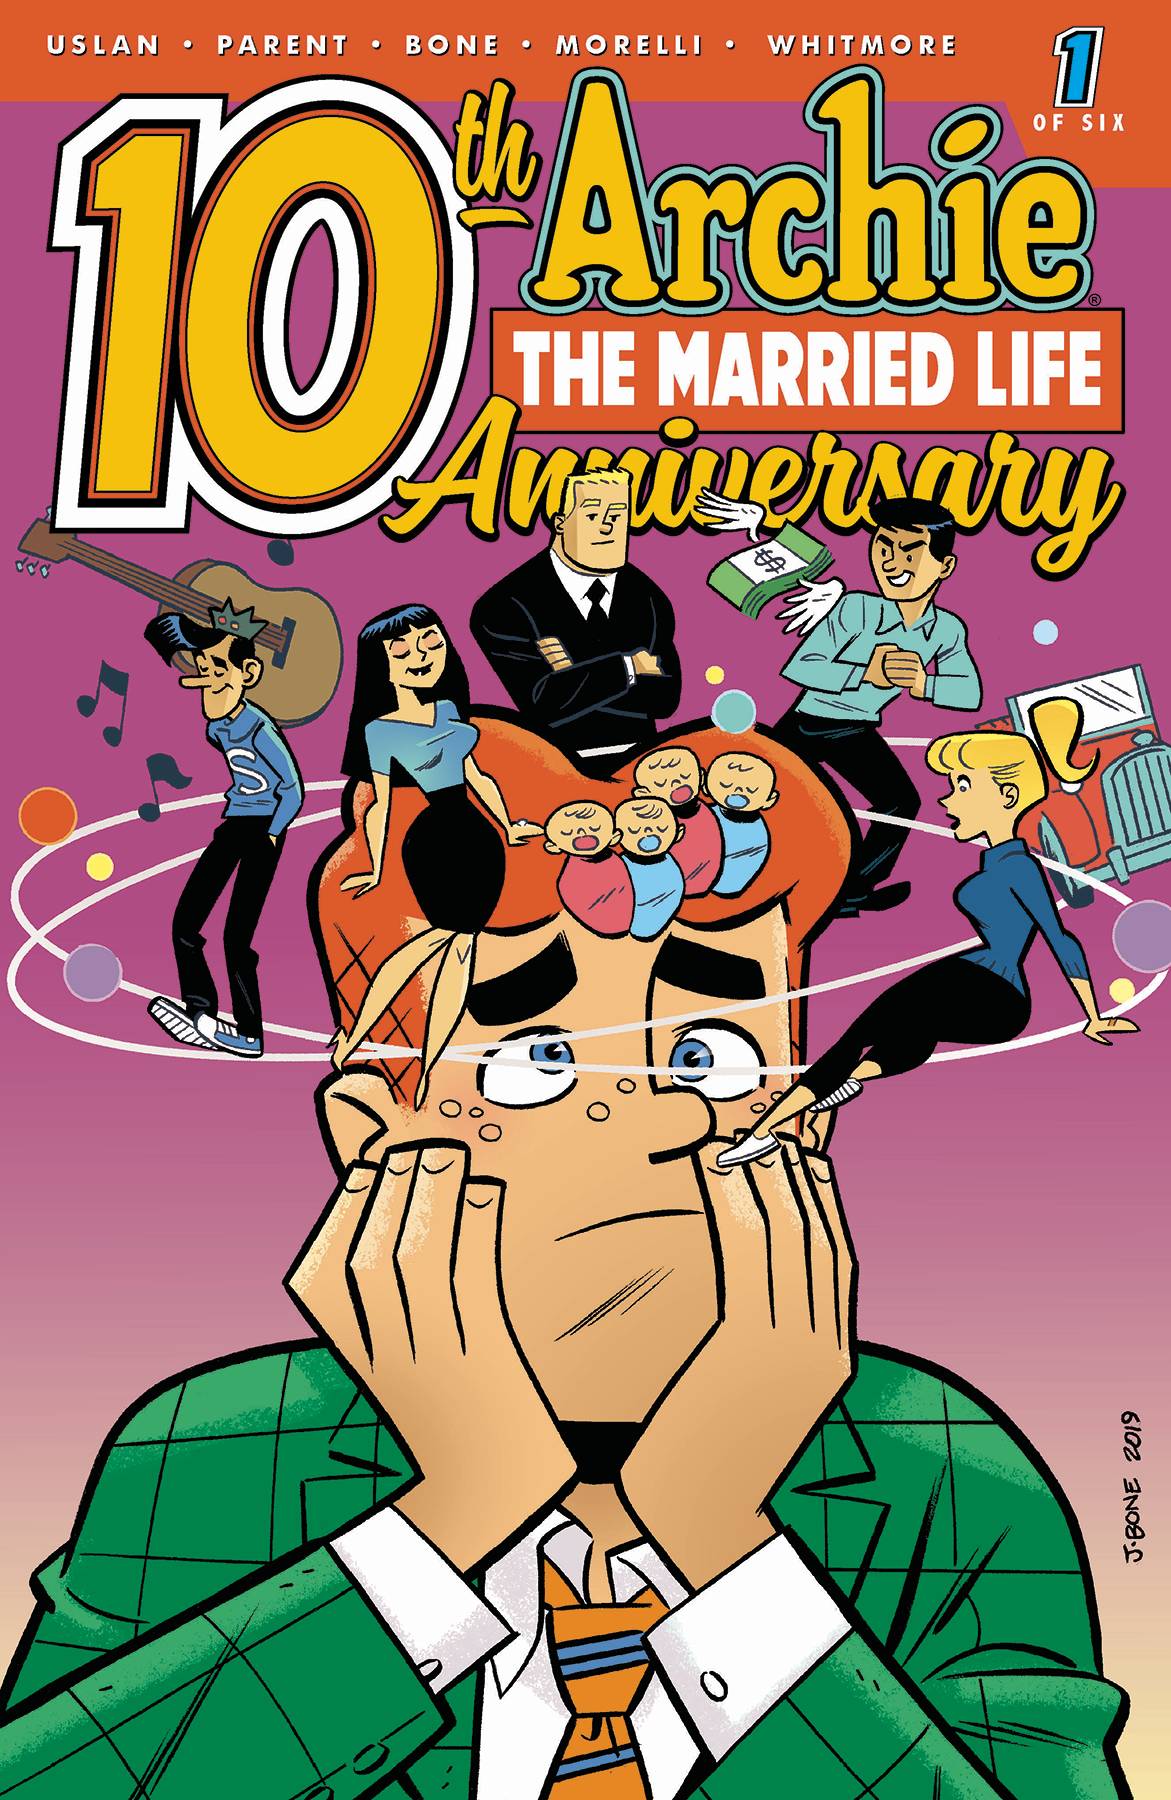 Archie Married Life 10 Years Later #1 Cover B Bone